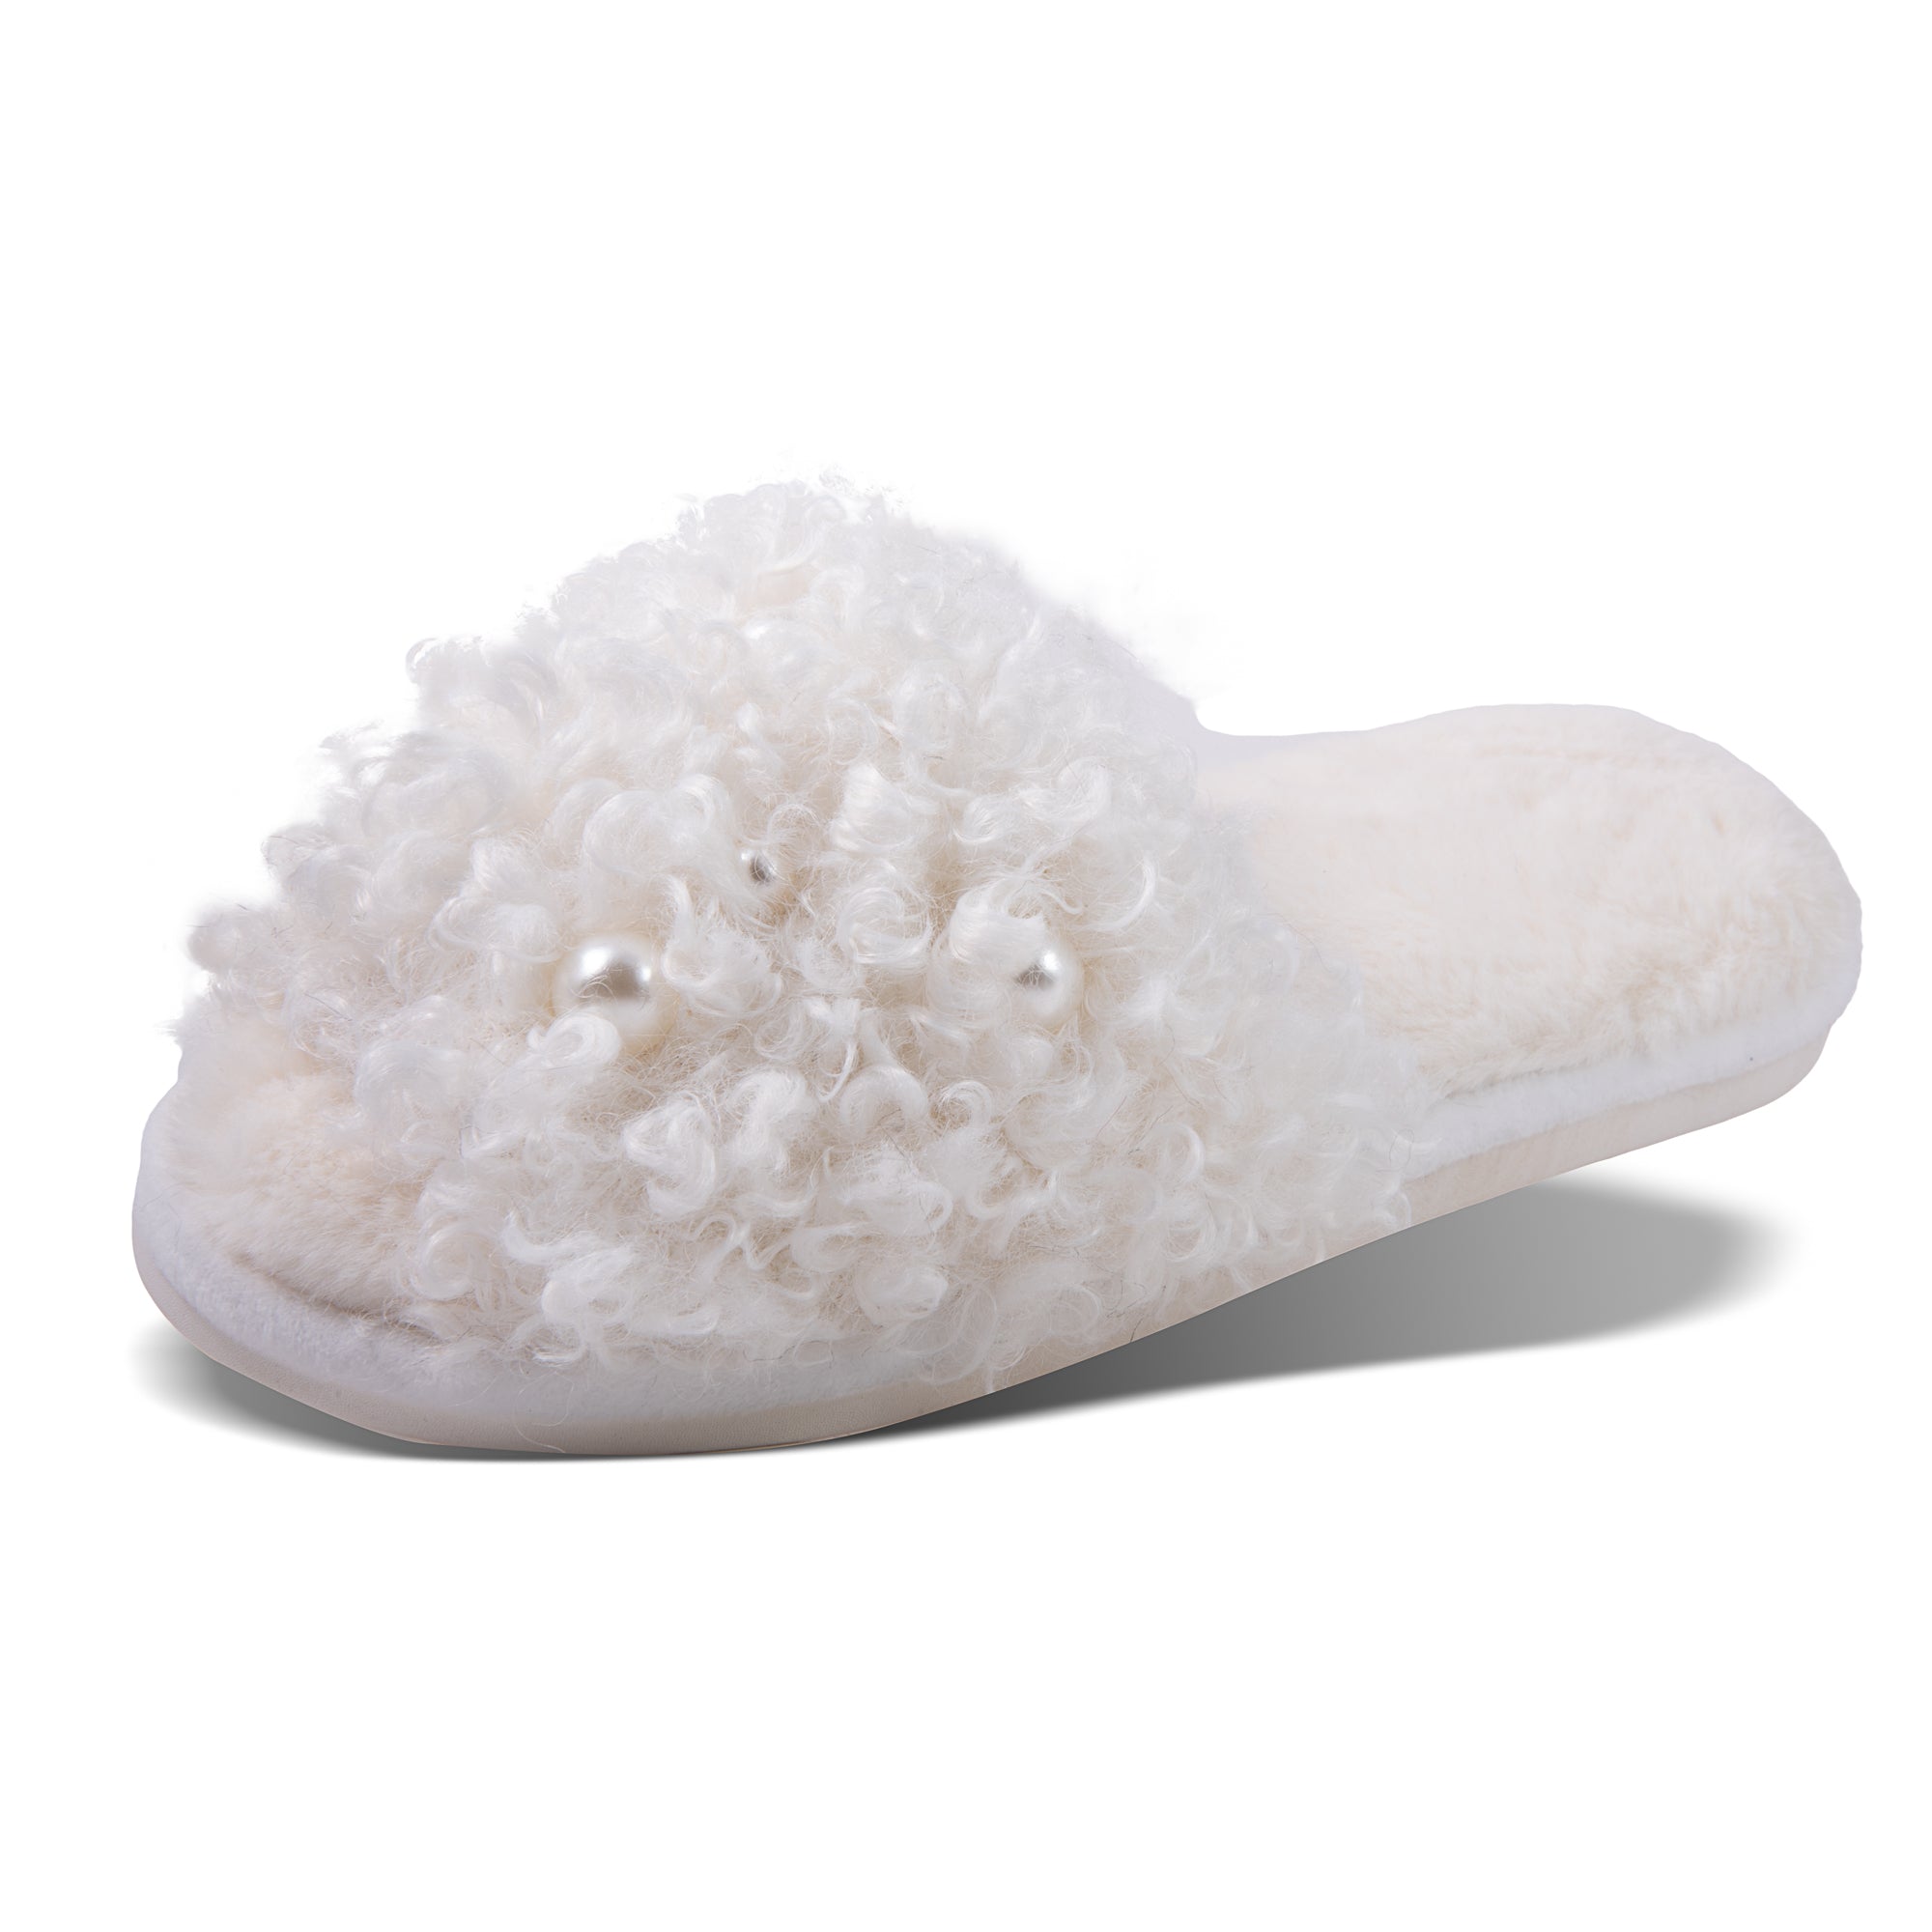 Fuzzy Pearl Bridal Slipper Robed With Love, 53% OFF